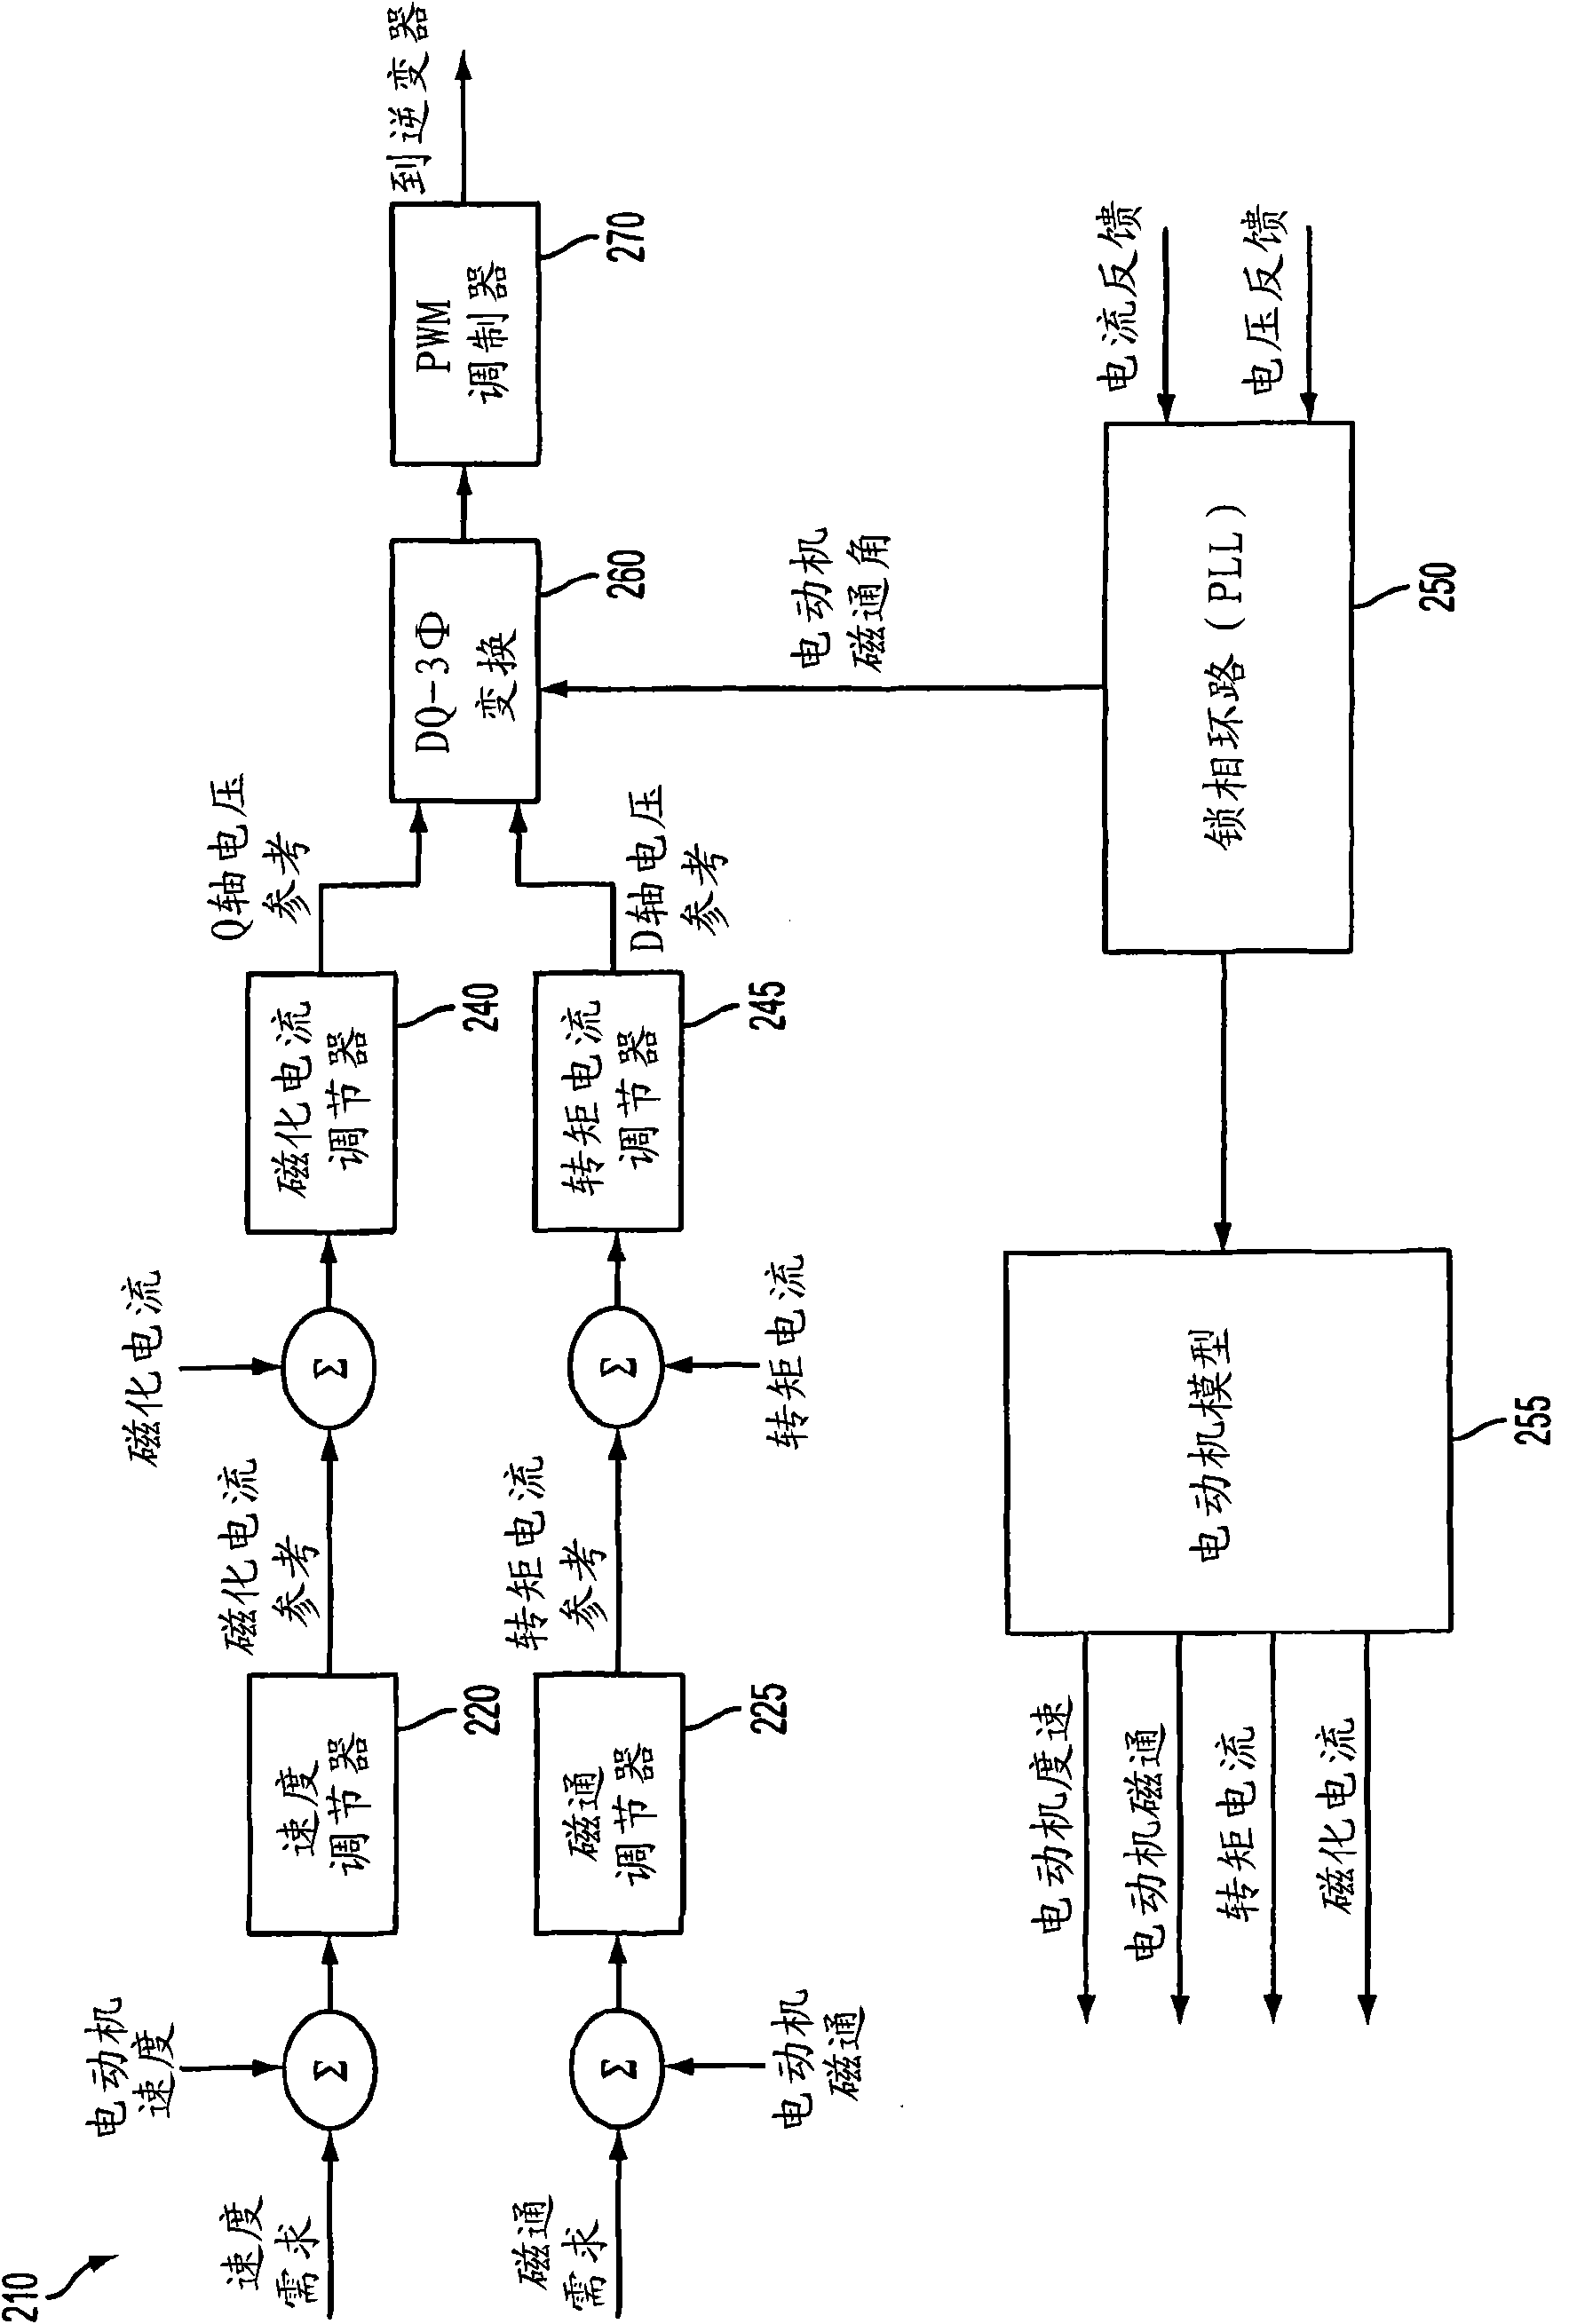 Method of starting a synchronous motor with a brushless DC exciter